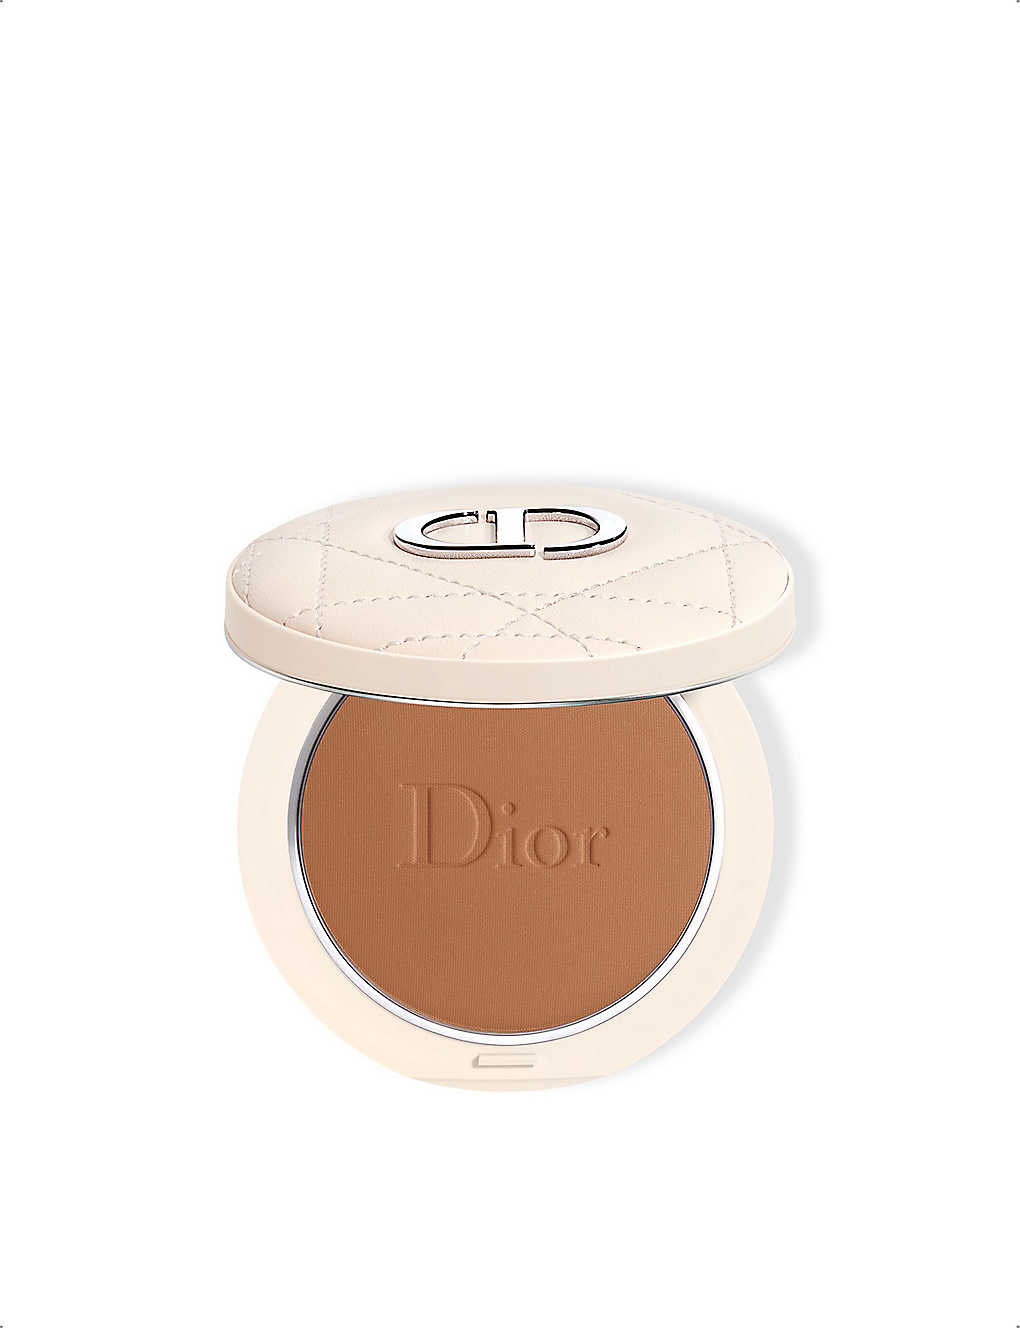 Dior Forever Natural Bronze Powder 9g In 007